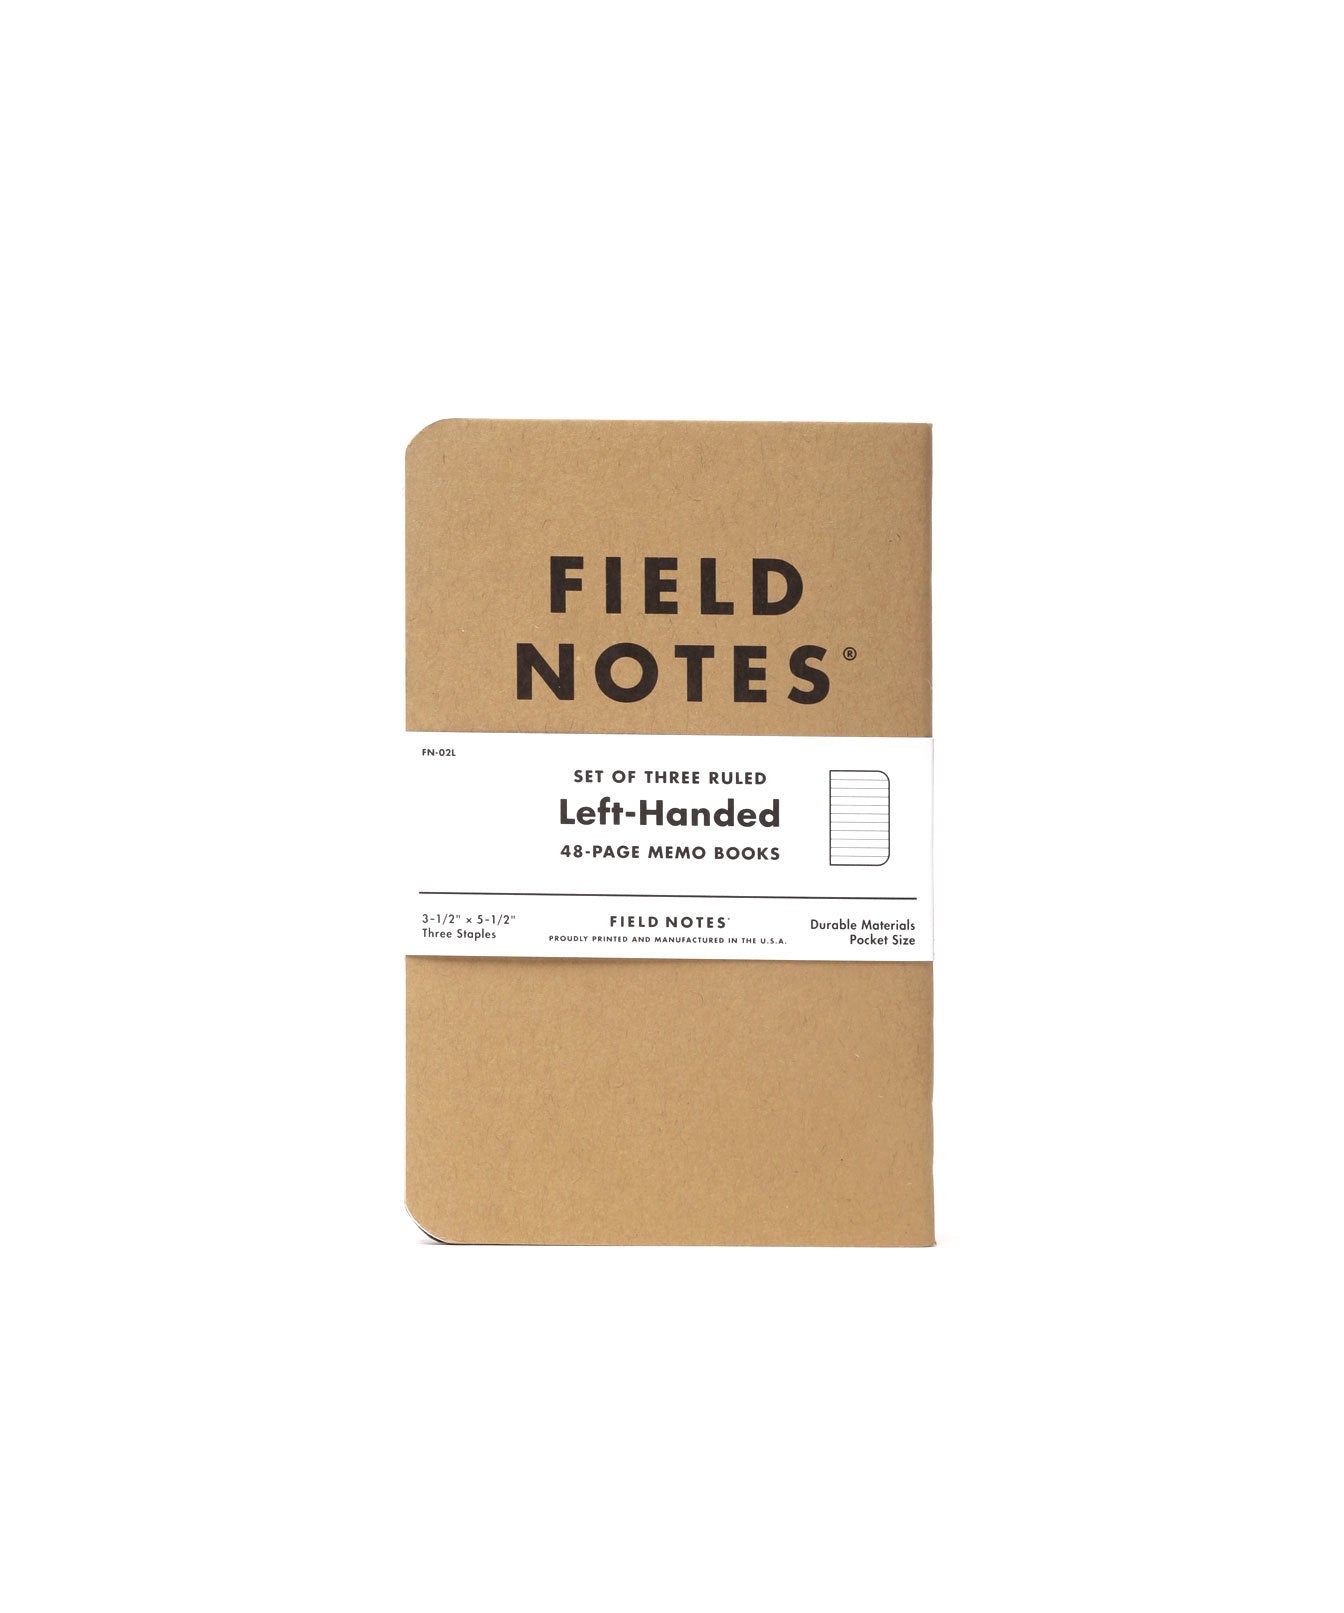 Set of 3, ruled, left-handed, kraft brown, memo books with white paper bands and Field Notes logo in black ink.